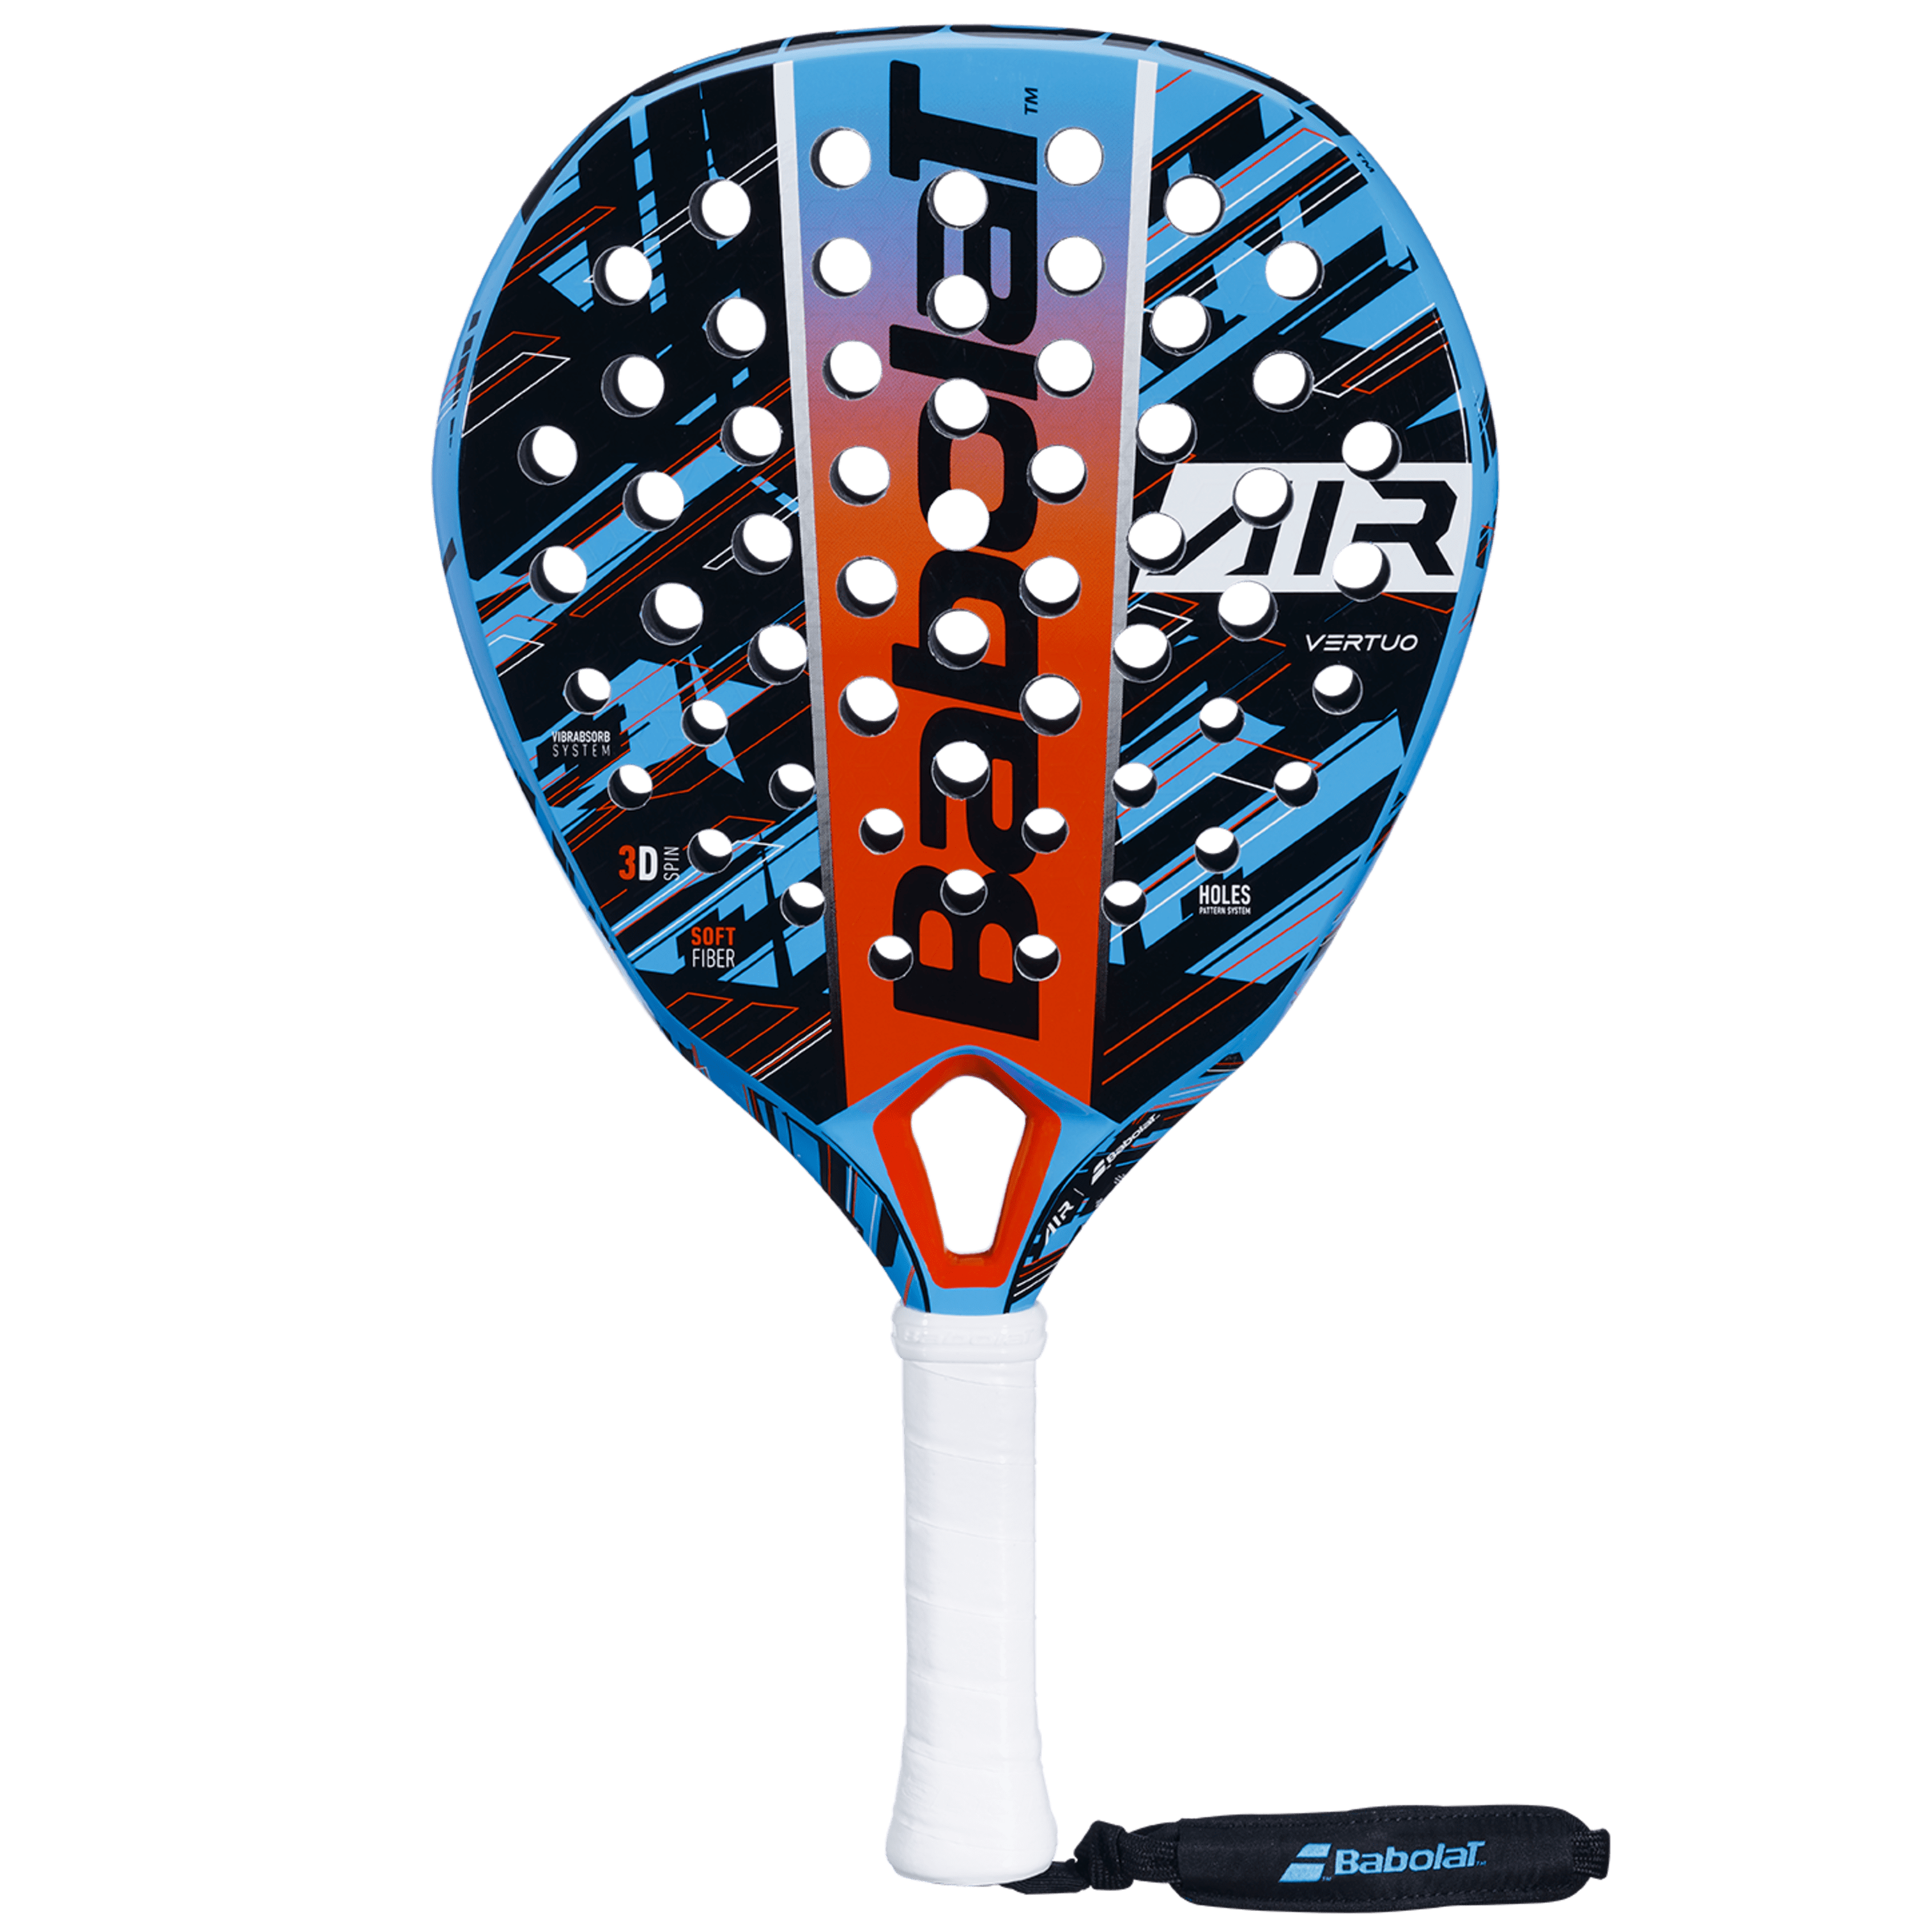 Babolat Air Vertuo Padel Racket showcasing its unique 3D Spin feature for enhanced gameplay.